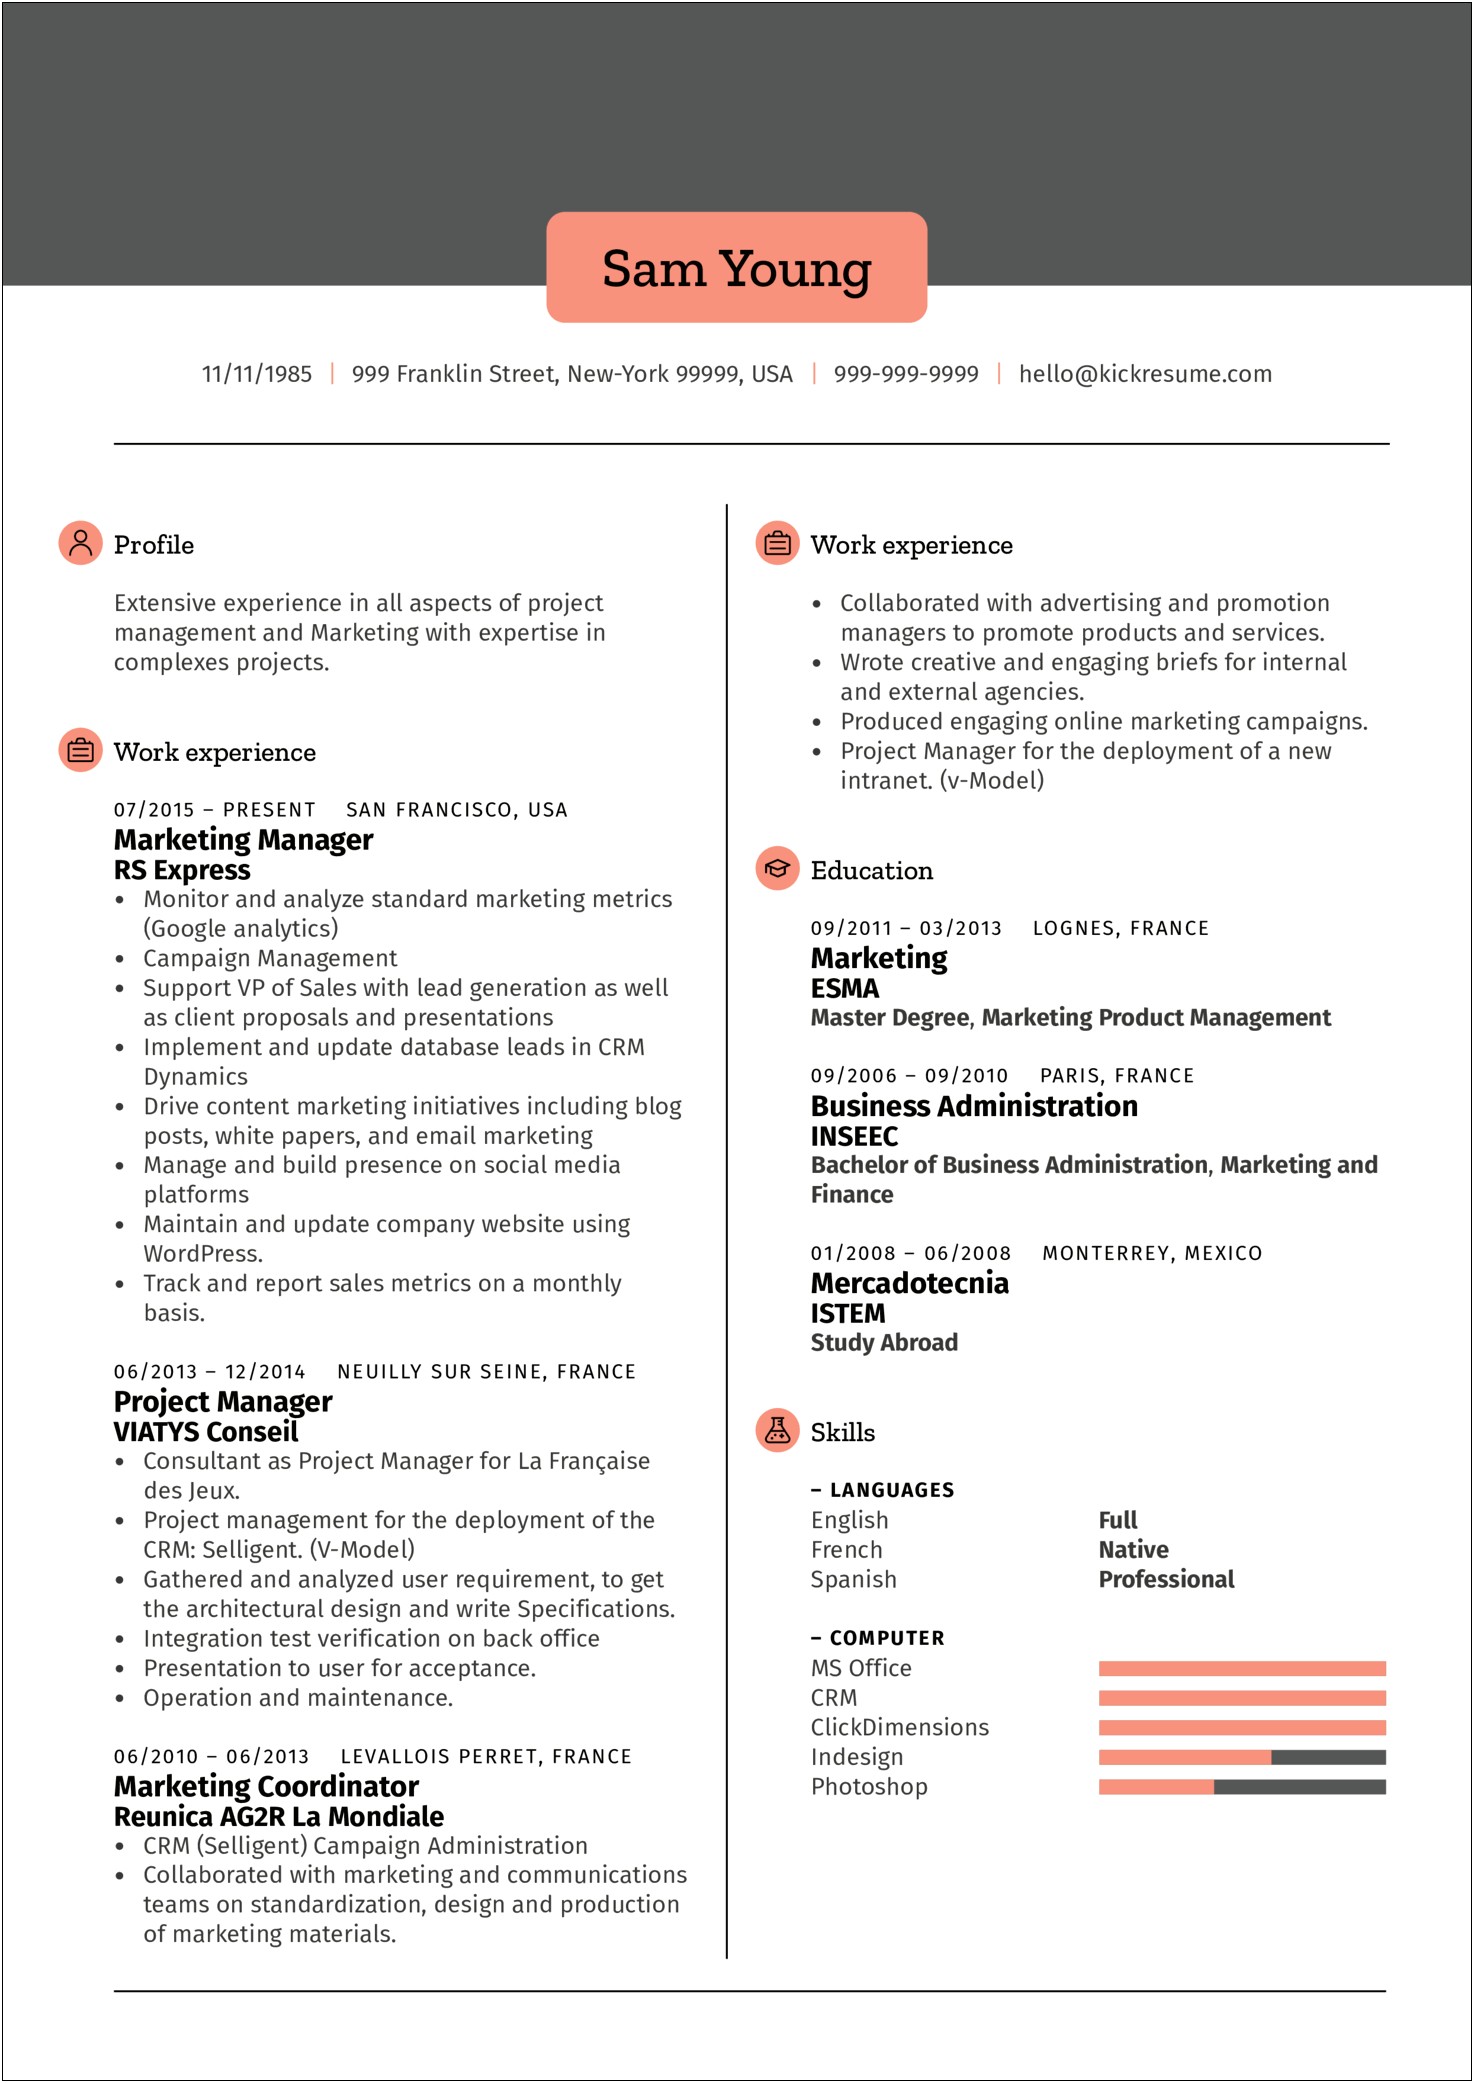 Resume To Promote My Business Template